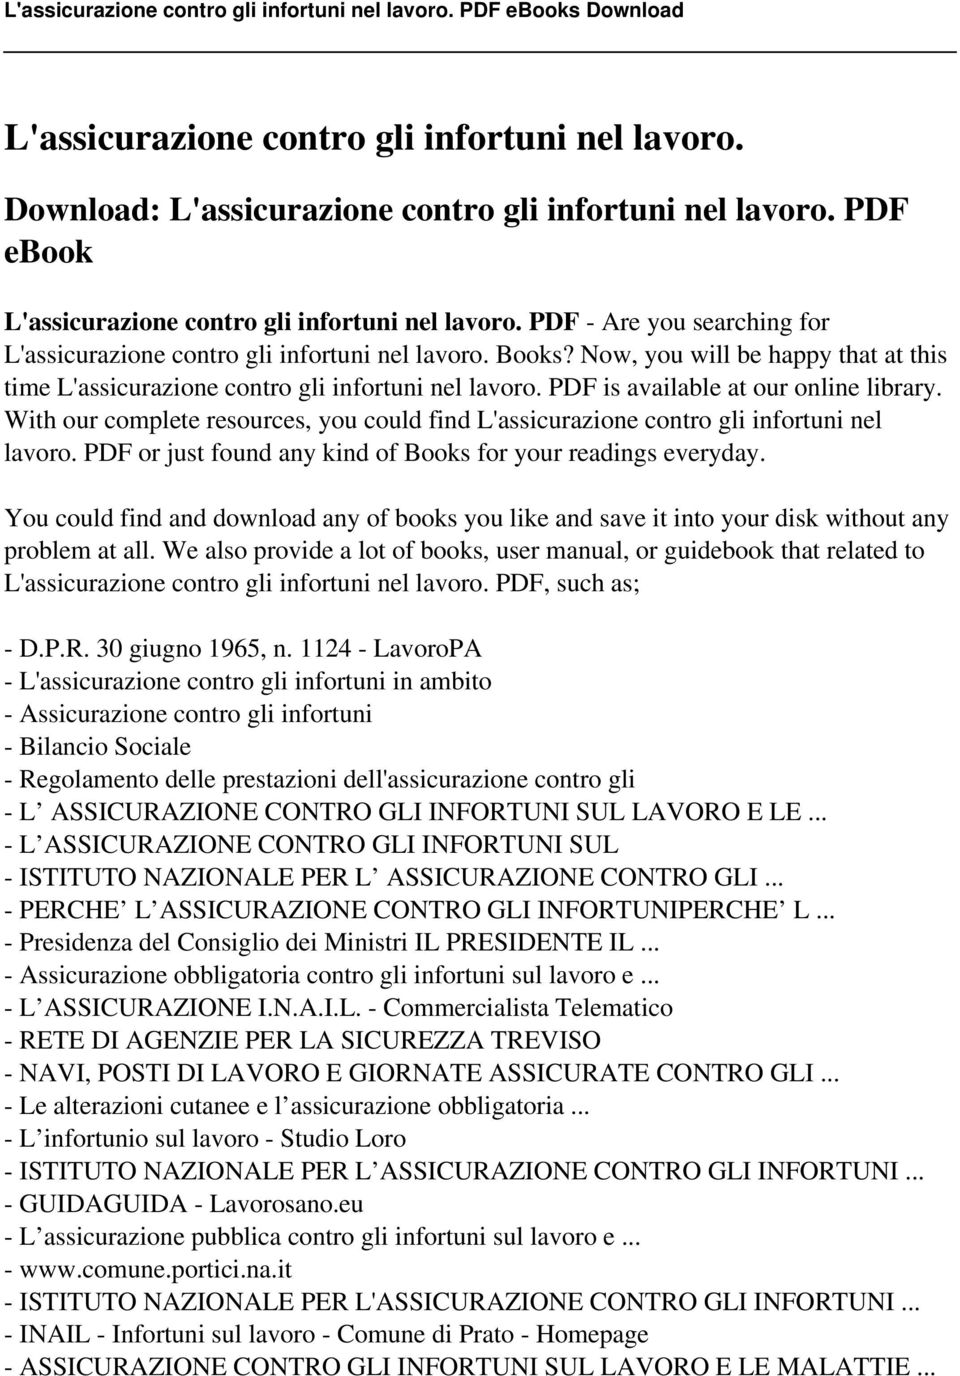 PDF is available at our online library. With our complete resources, you could find L'assicurazione contro gli infortuni nel lavoro. PDF or just found any kind of Books for your readings everyday.